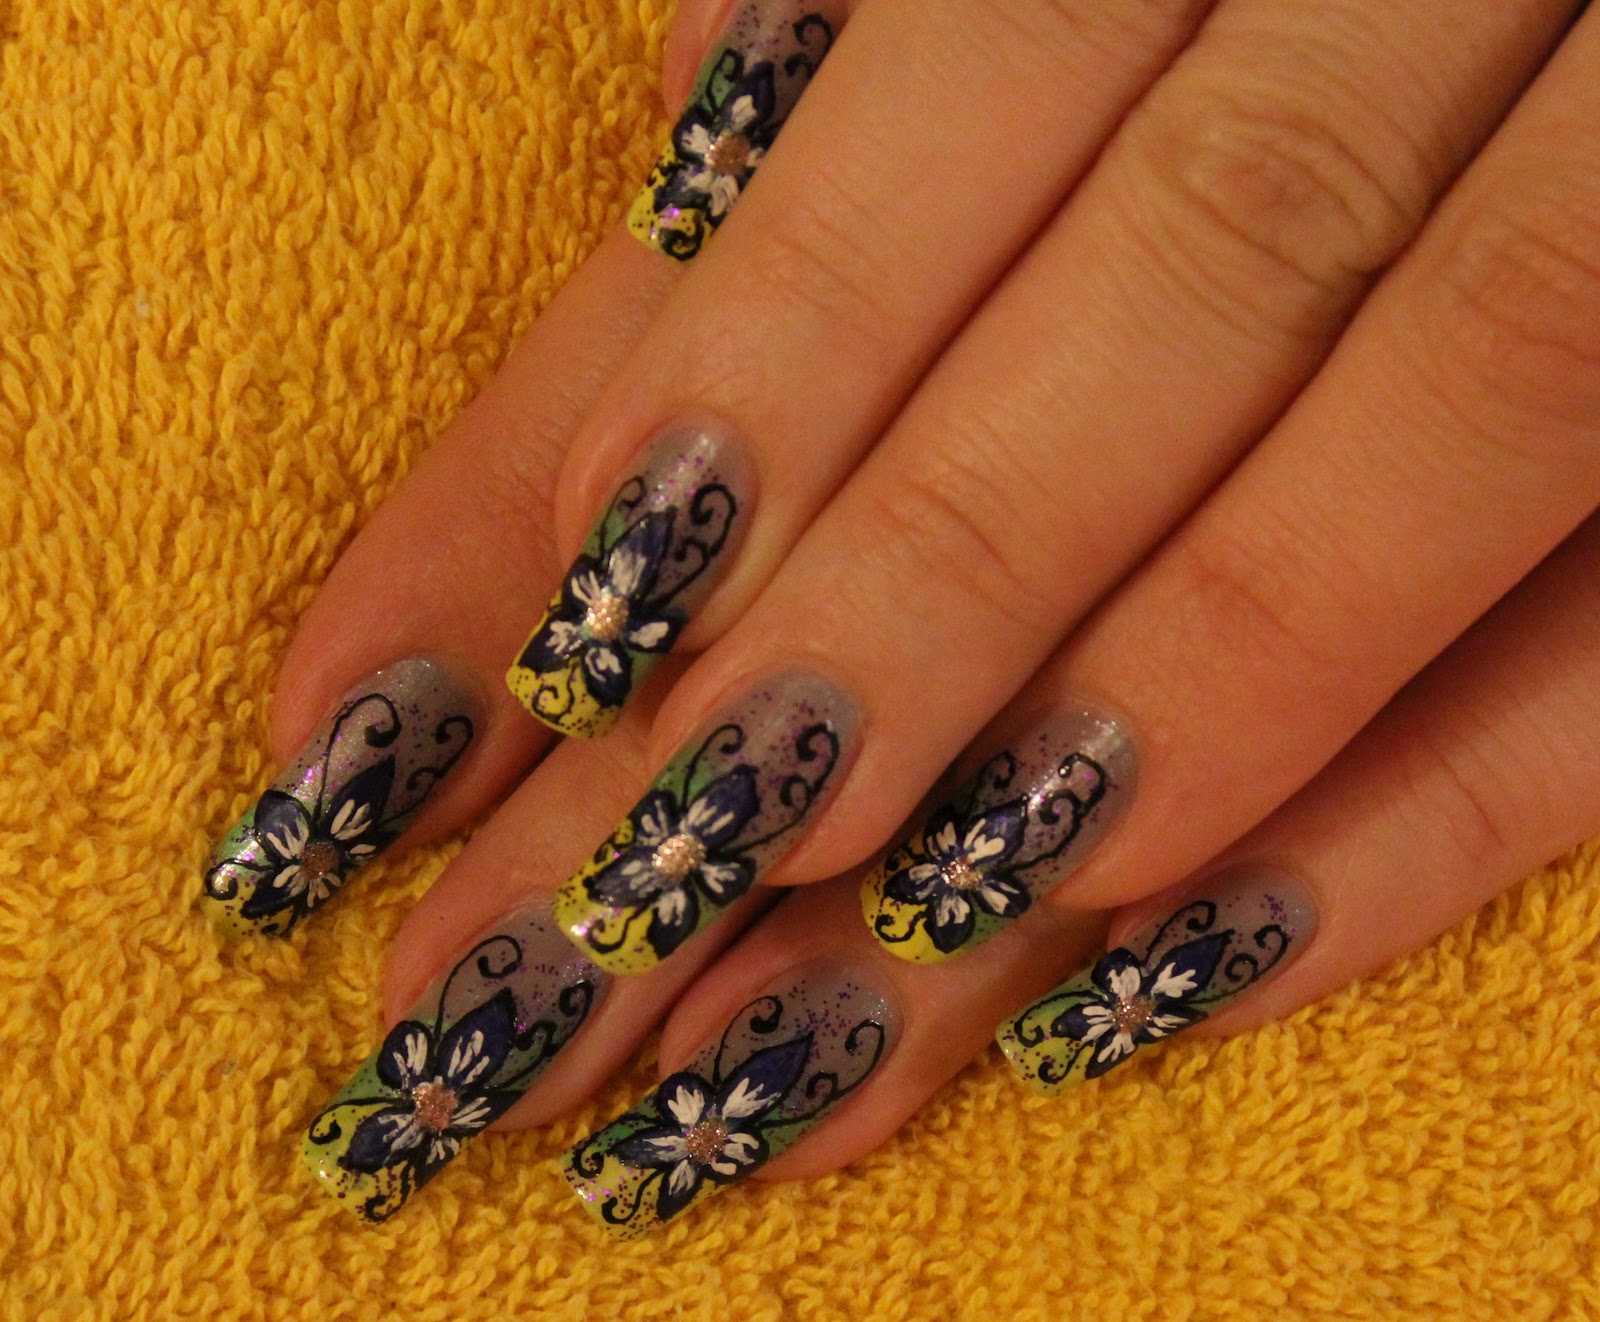 4. "Blue Floral Prom Nail Art" - wide 10